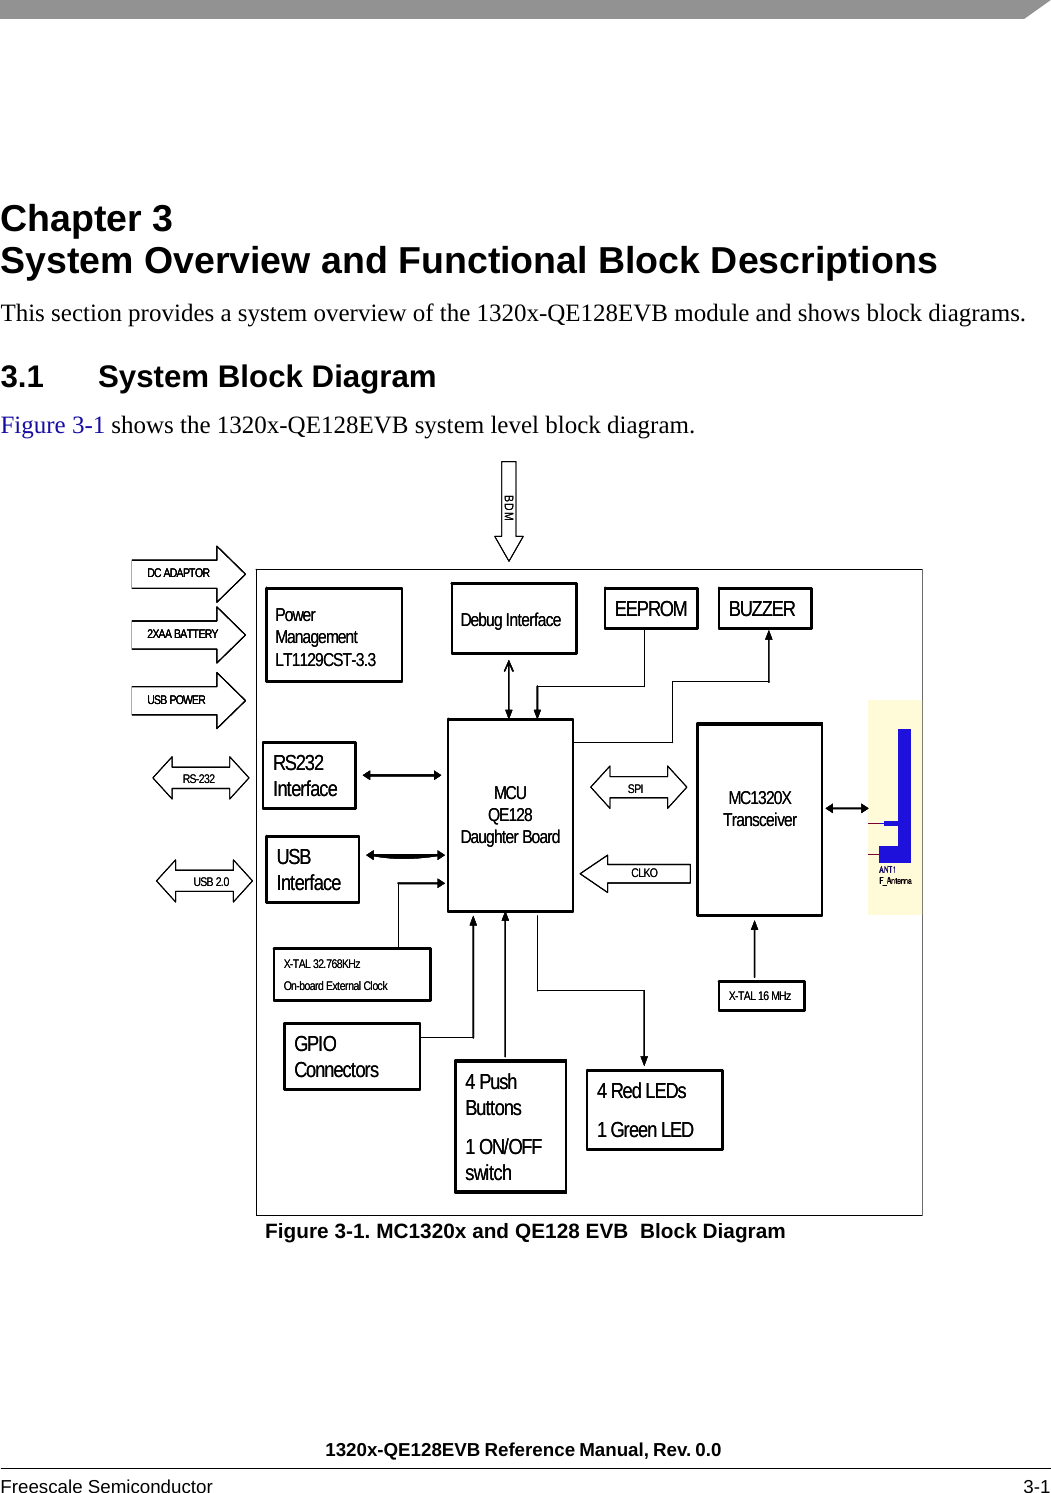 1320x-QE128EVB Reference Manual, Rev. 0.0 Freescale Semiconductor 3-1Chapter 3  System Overview and Functional Block DescriptionsThis section provides a system overview of the 1320x-QE128EVB module and shows block diagrams.3.1 System Block DiagramFigure 3-1 shows the 1320x-QE128EVB system level block diagram.Figure 3-1. MC1320x and QE128 EVB  Block DiagramPowerManagementLT1129CST-3.3DC ADAPTOR2XAA BATTERYUSB POWERDebug InterfaceBDMMCUQE128Daughter BoardMC1320XTransceiverSPICLKORS232 InterfaceUSB InterfaceRS-232 USB 2.04 Push Buttons1 ON/OFF switch4 Red LEDs1 Green LEDX-TAL 32.768KHzOn-board External Clock X-TAL 16 MHzEEPROM BUZZERGPIO ConnectorsPowerManagementLT1129CST-3.3DC ADAPTORDC ADAPTOR2XAA BATTERY2XAA BATTERYUSB POWERUSB POWERDebug InterfaceBDMMCUQE128Daughter BoardMC1320XTransceiverSPICLKORS232 InterfaceUSB InterfaceRS-232 USB 2.04 Push Buttons1 ON/OFF switch4 Red LEDs1 Green LEDX-TAL 32.768KHzOn-board External Clock X-TAL 16 MHzEEPROM BUZZERGPIO Connectors